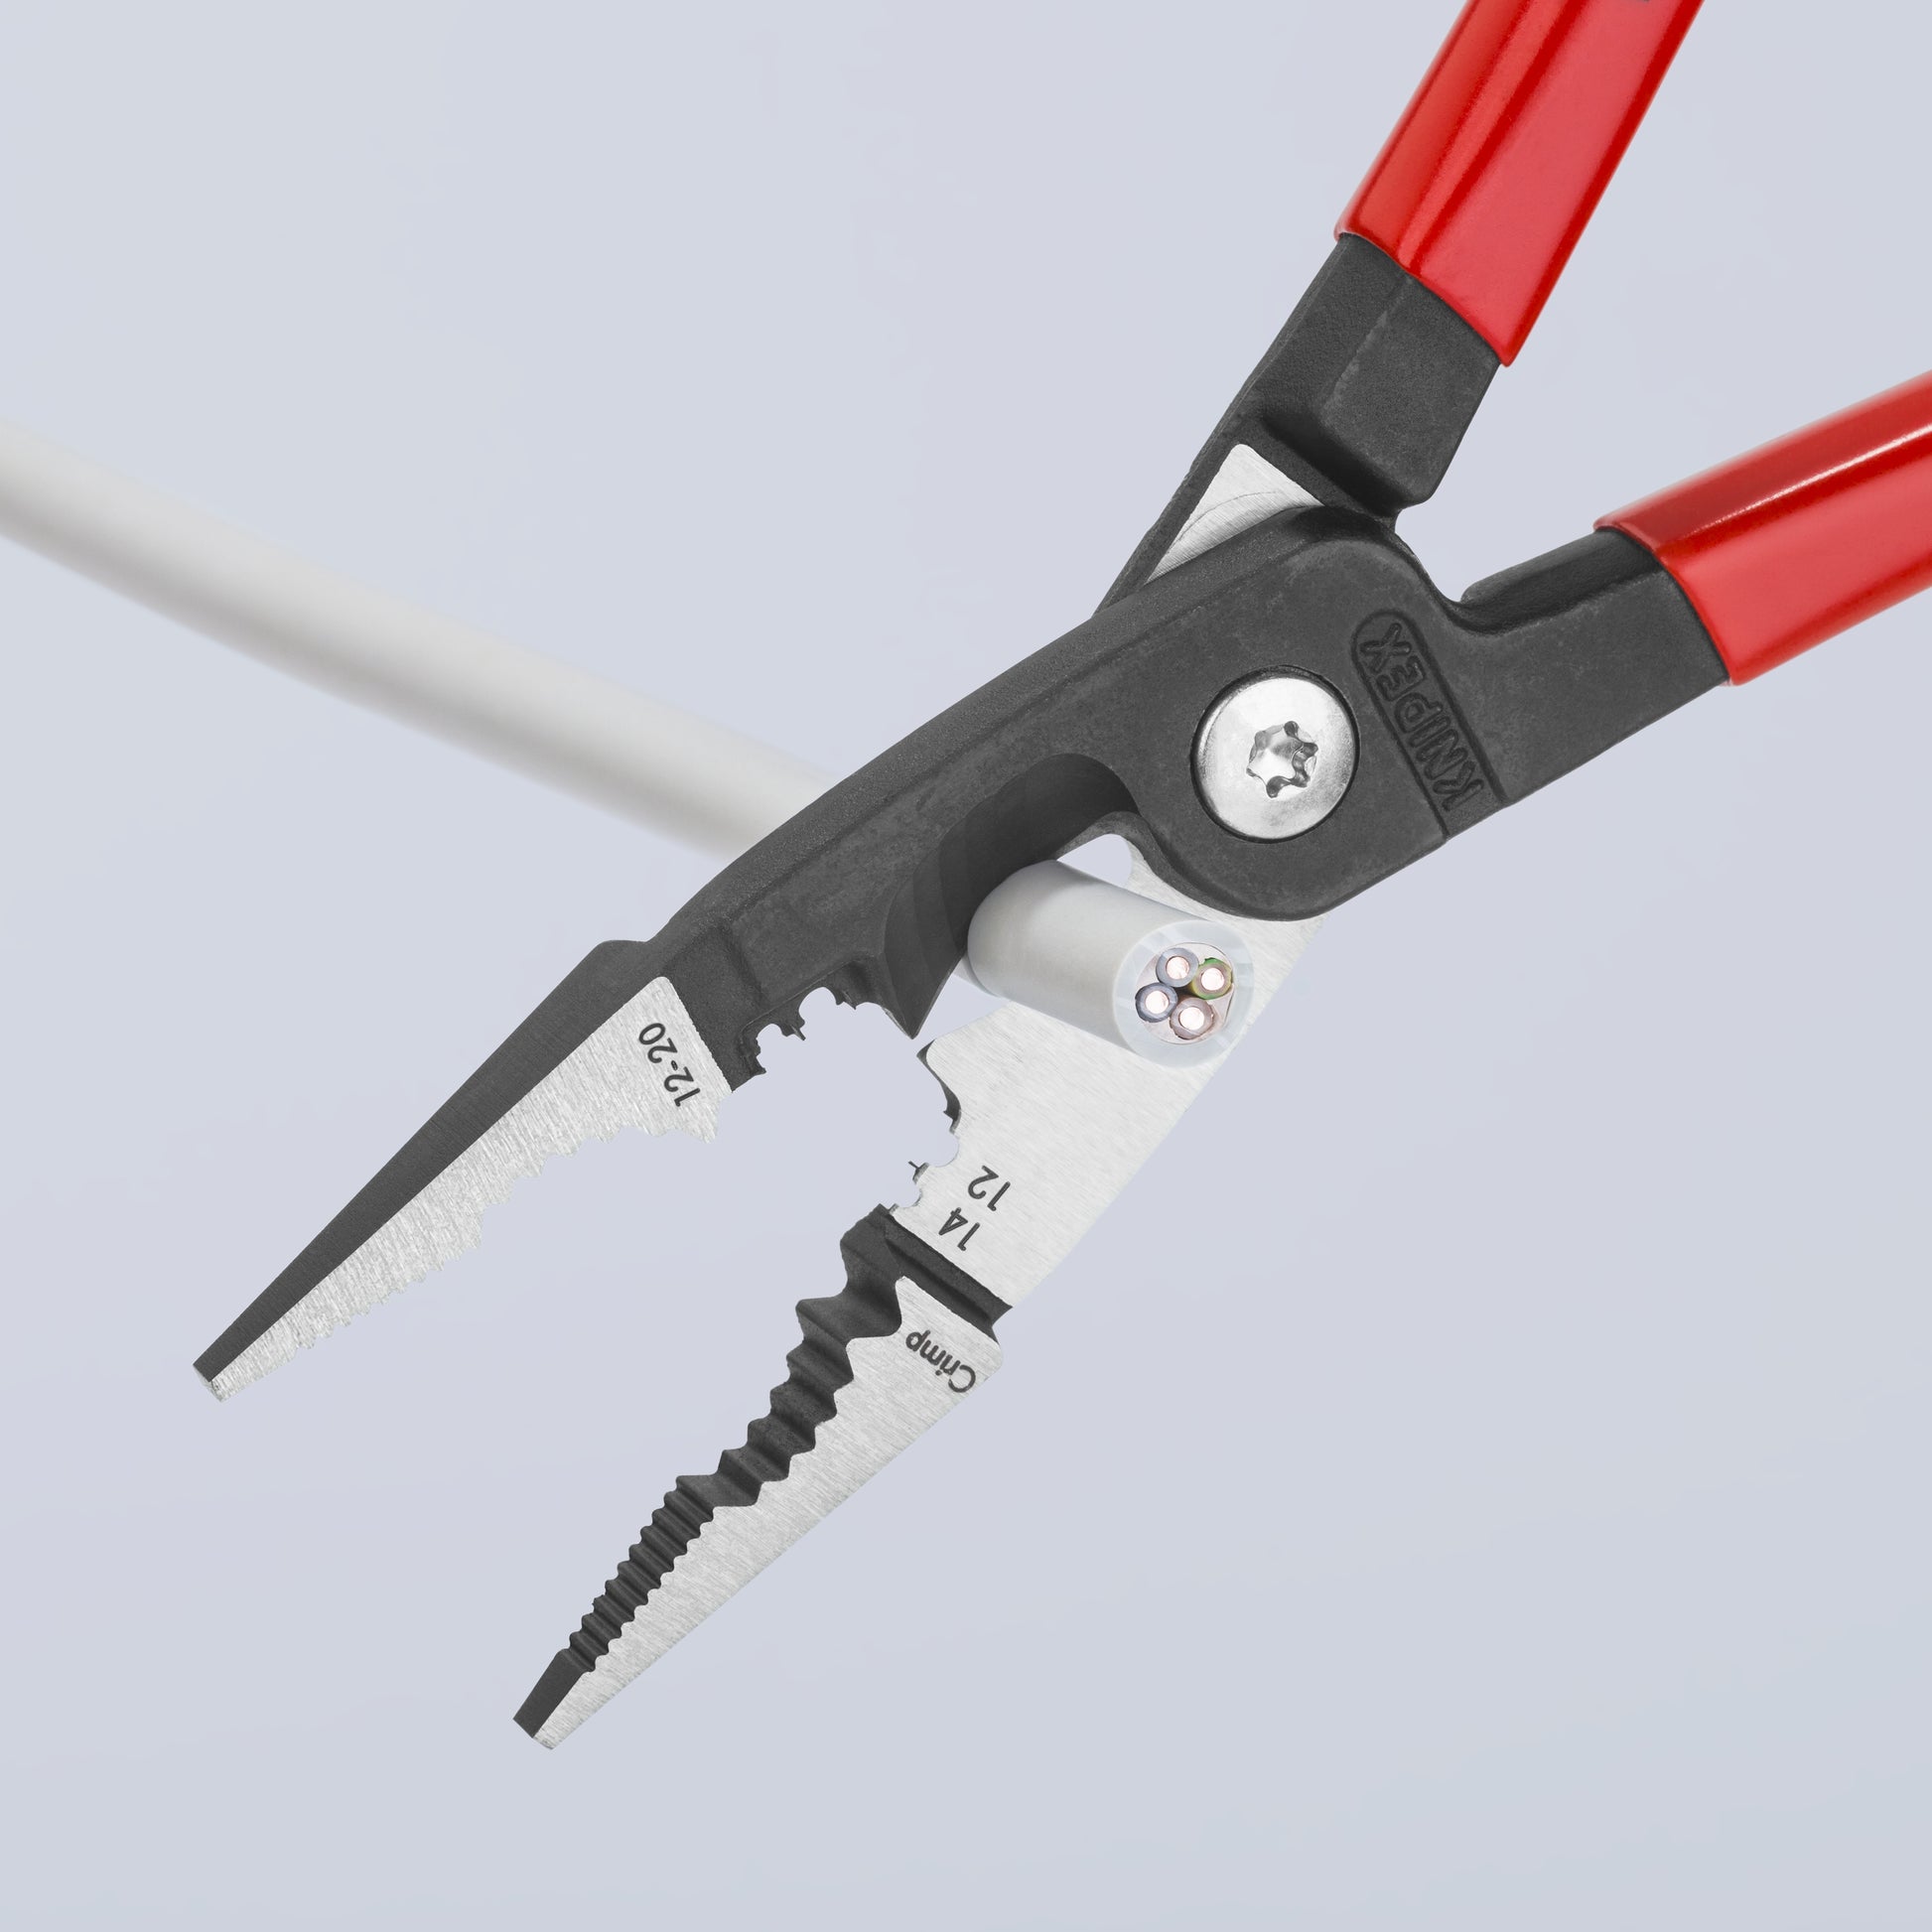 KNIPEX Electricians' Shears with Crimp Area for Ferrules - Red